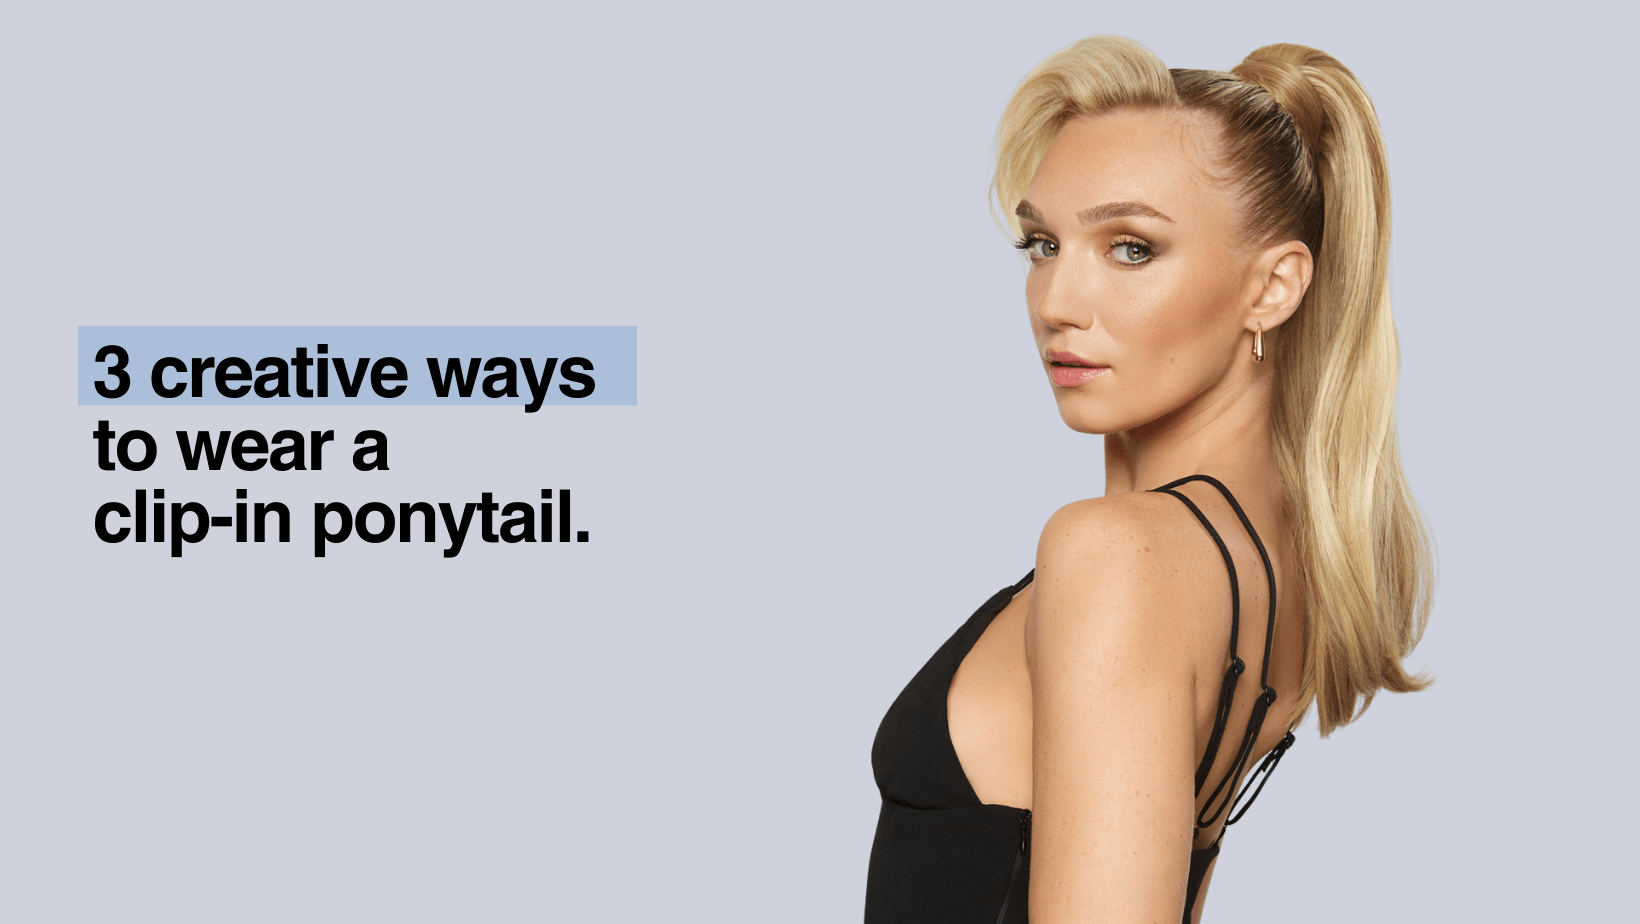 3 Creative Ways to Wear a Clip-in Ponytail